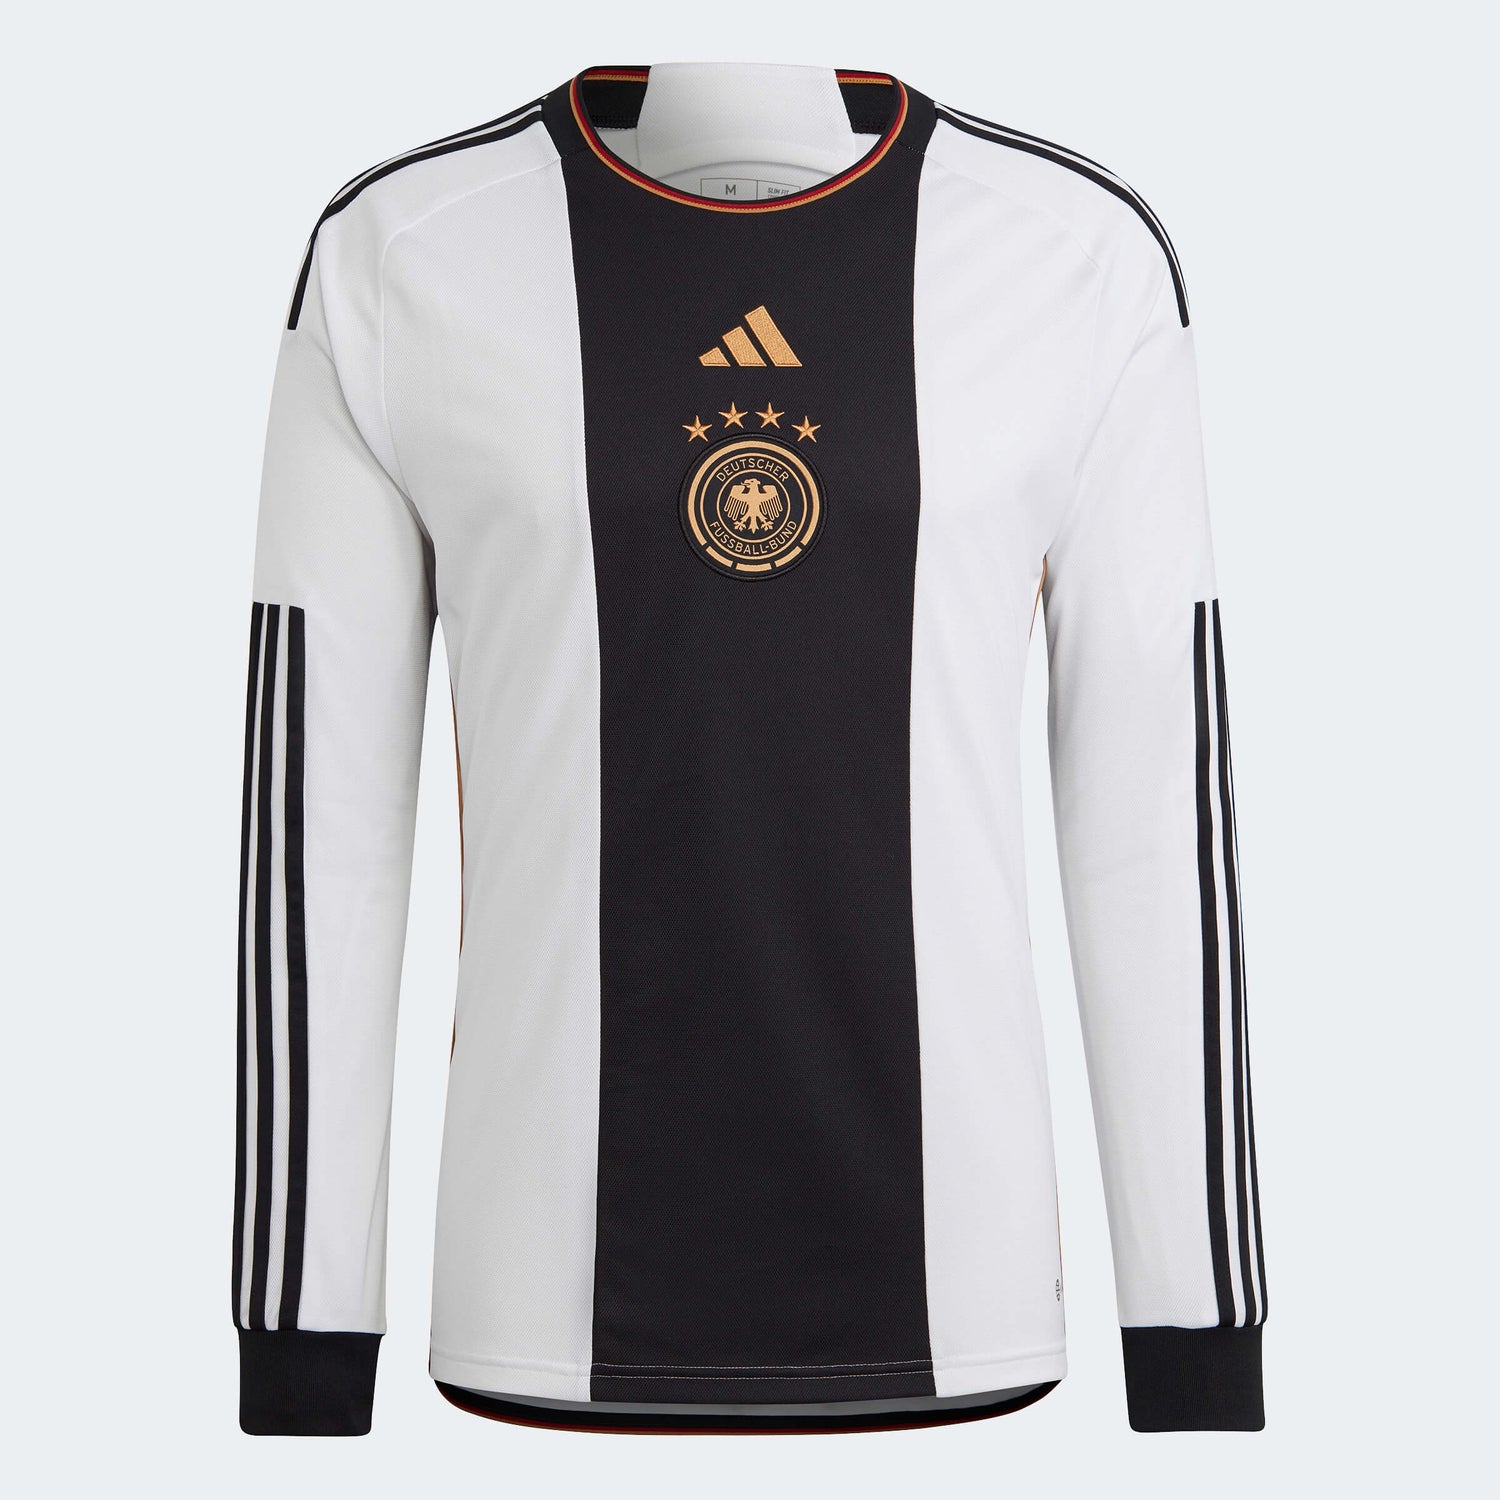 Adidas 2022-23 Germany Home Long Sleeve Jersey White-Black